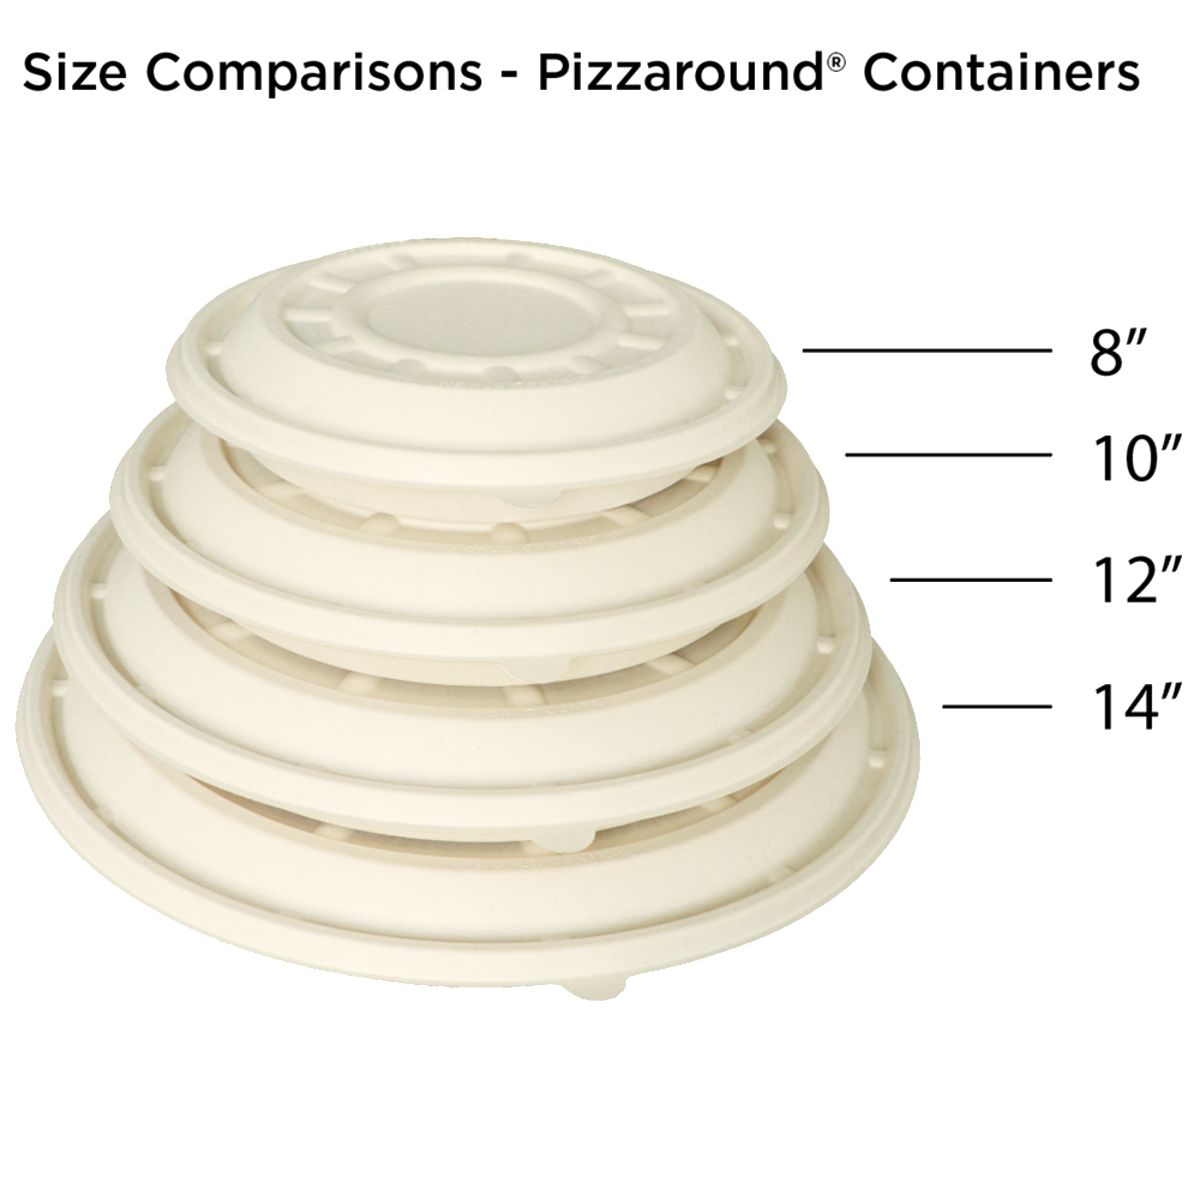 10" PizzaRound Tray - Lid sold separately - 200/case - World Centric